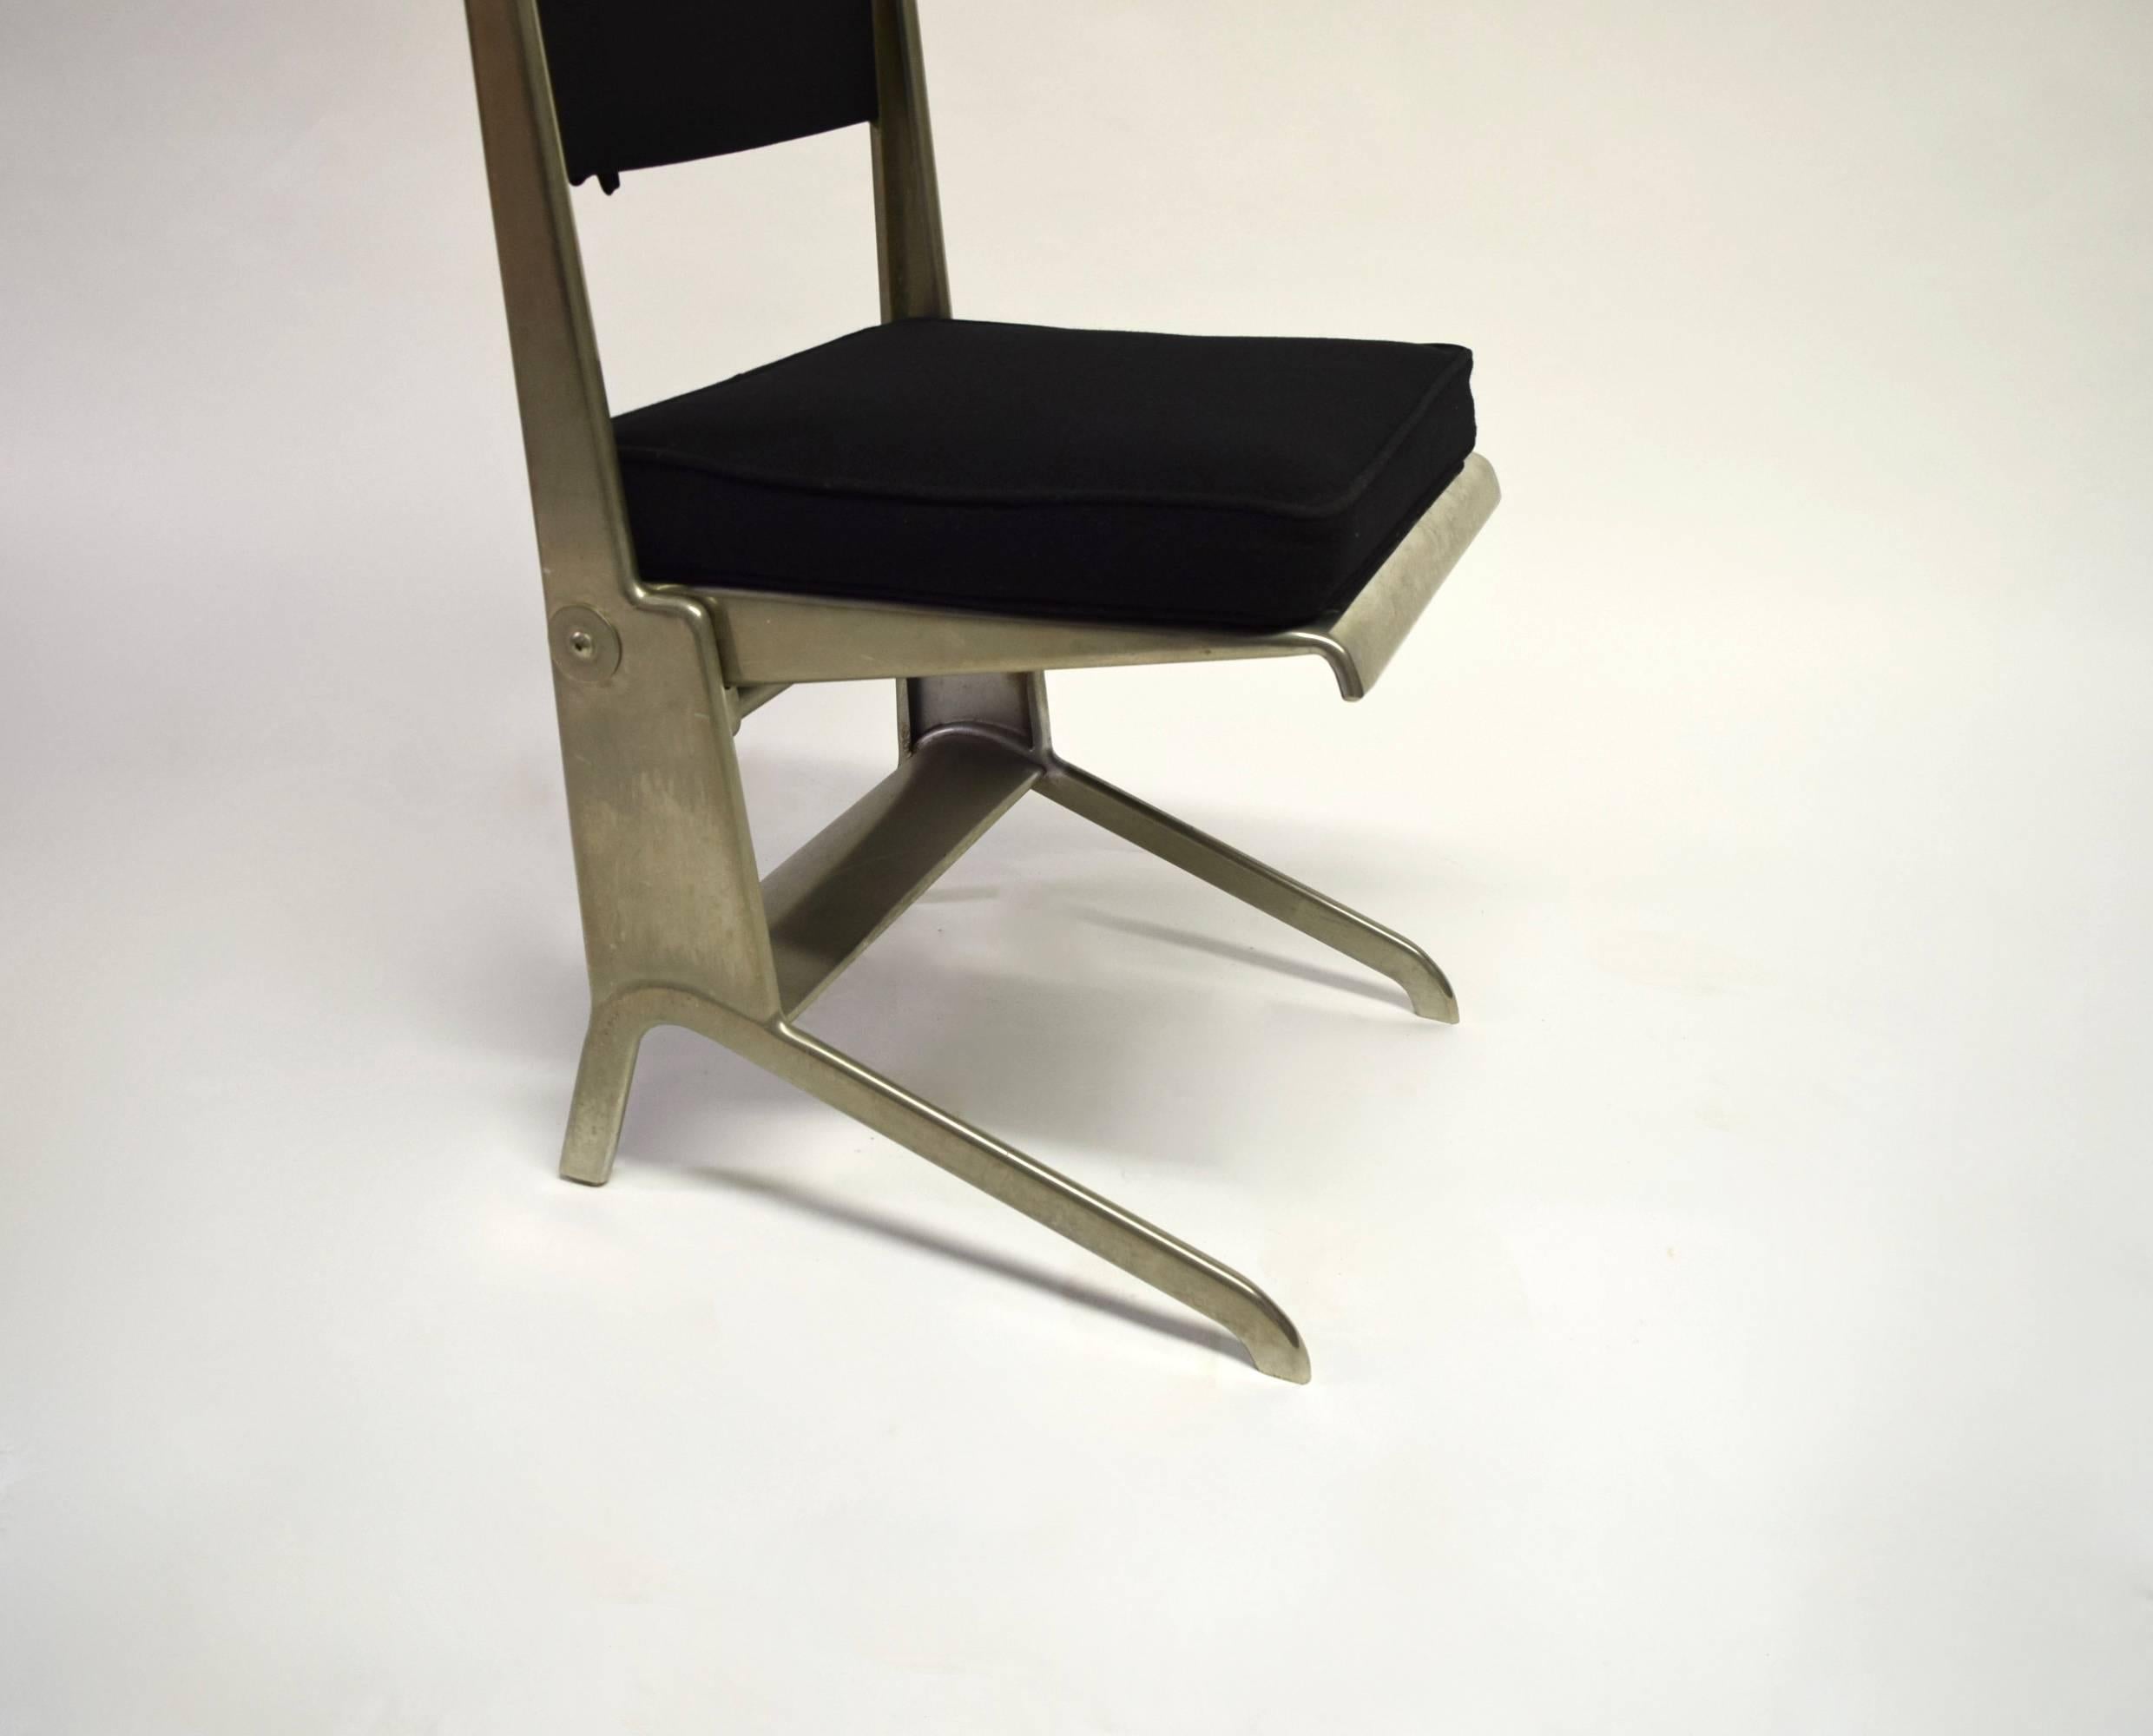 Steel Pair of Jean Prouvé Folding Chairs Designed 1930, Manufactured by Tecta 1983